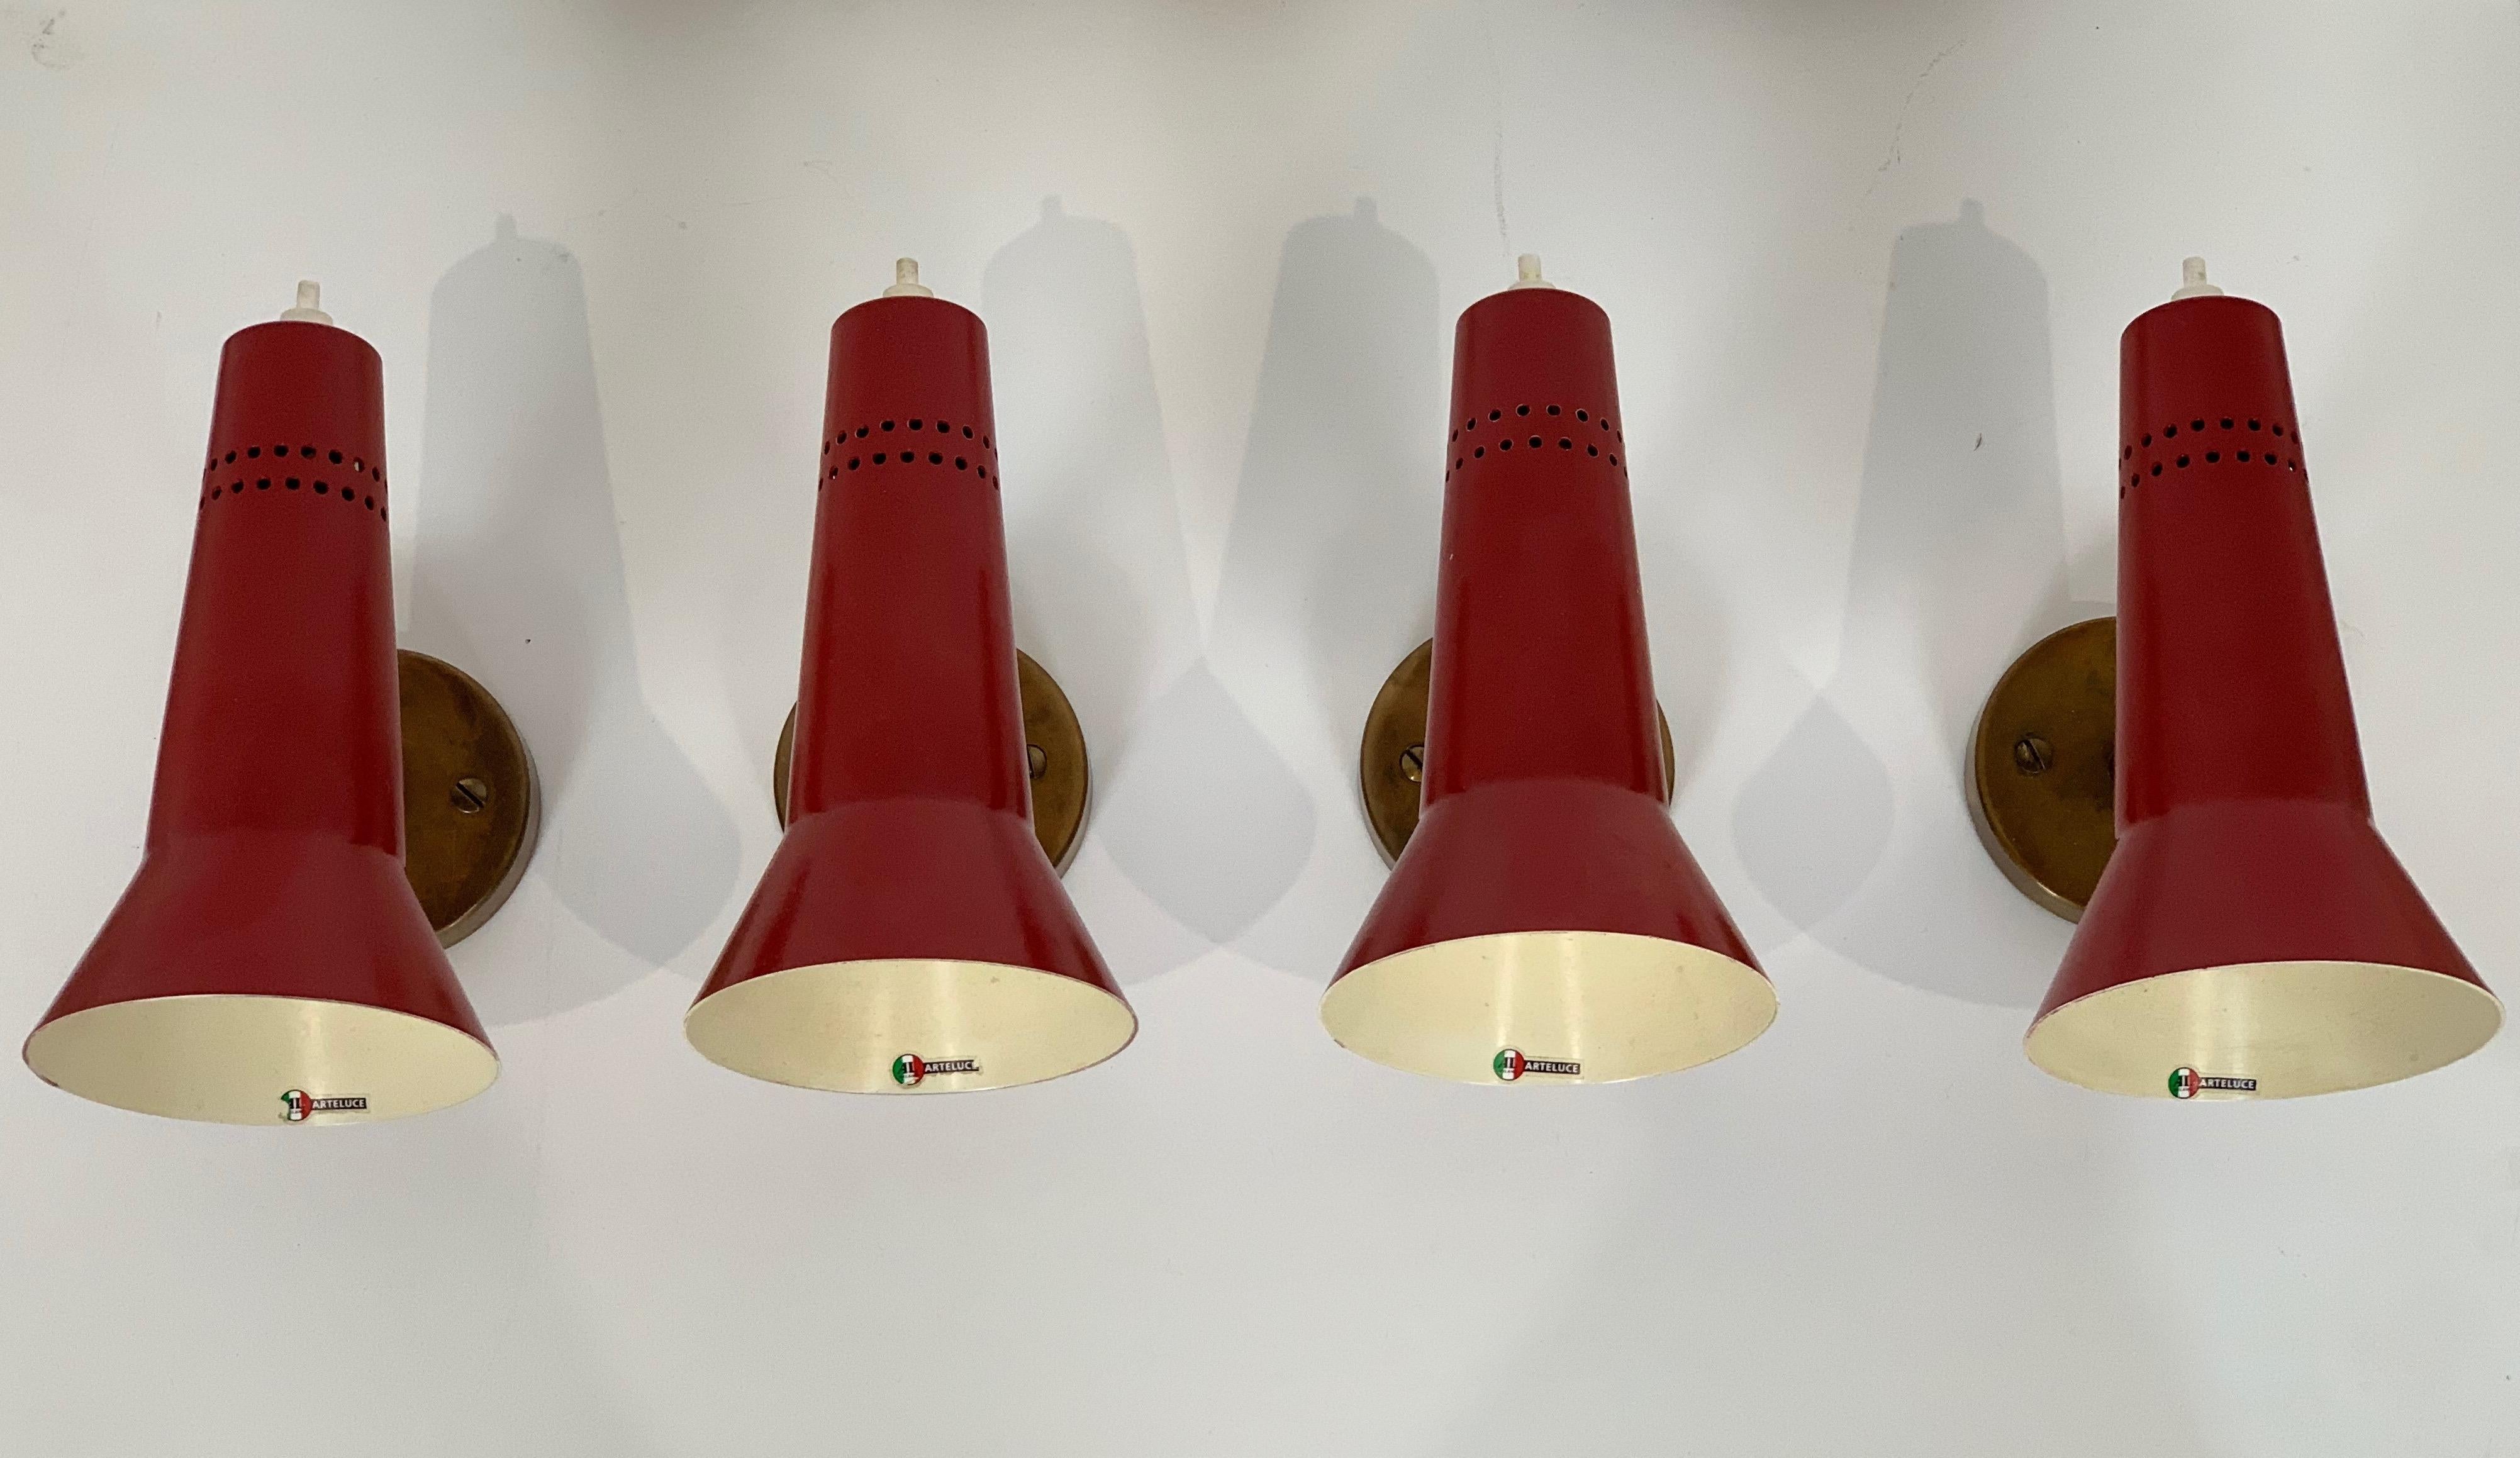 Four sconces designed by Gino Sarfatti and edited by Arteluce in 1955.Adjustable reflectors in coloured lacquered aluminium. Arm, pivot and base in polished brass. Litt. 